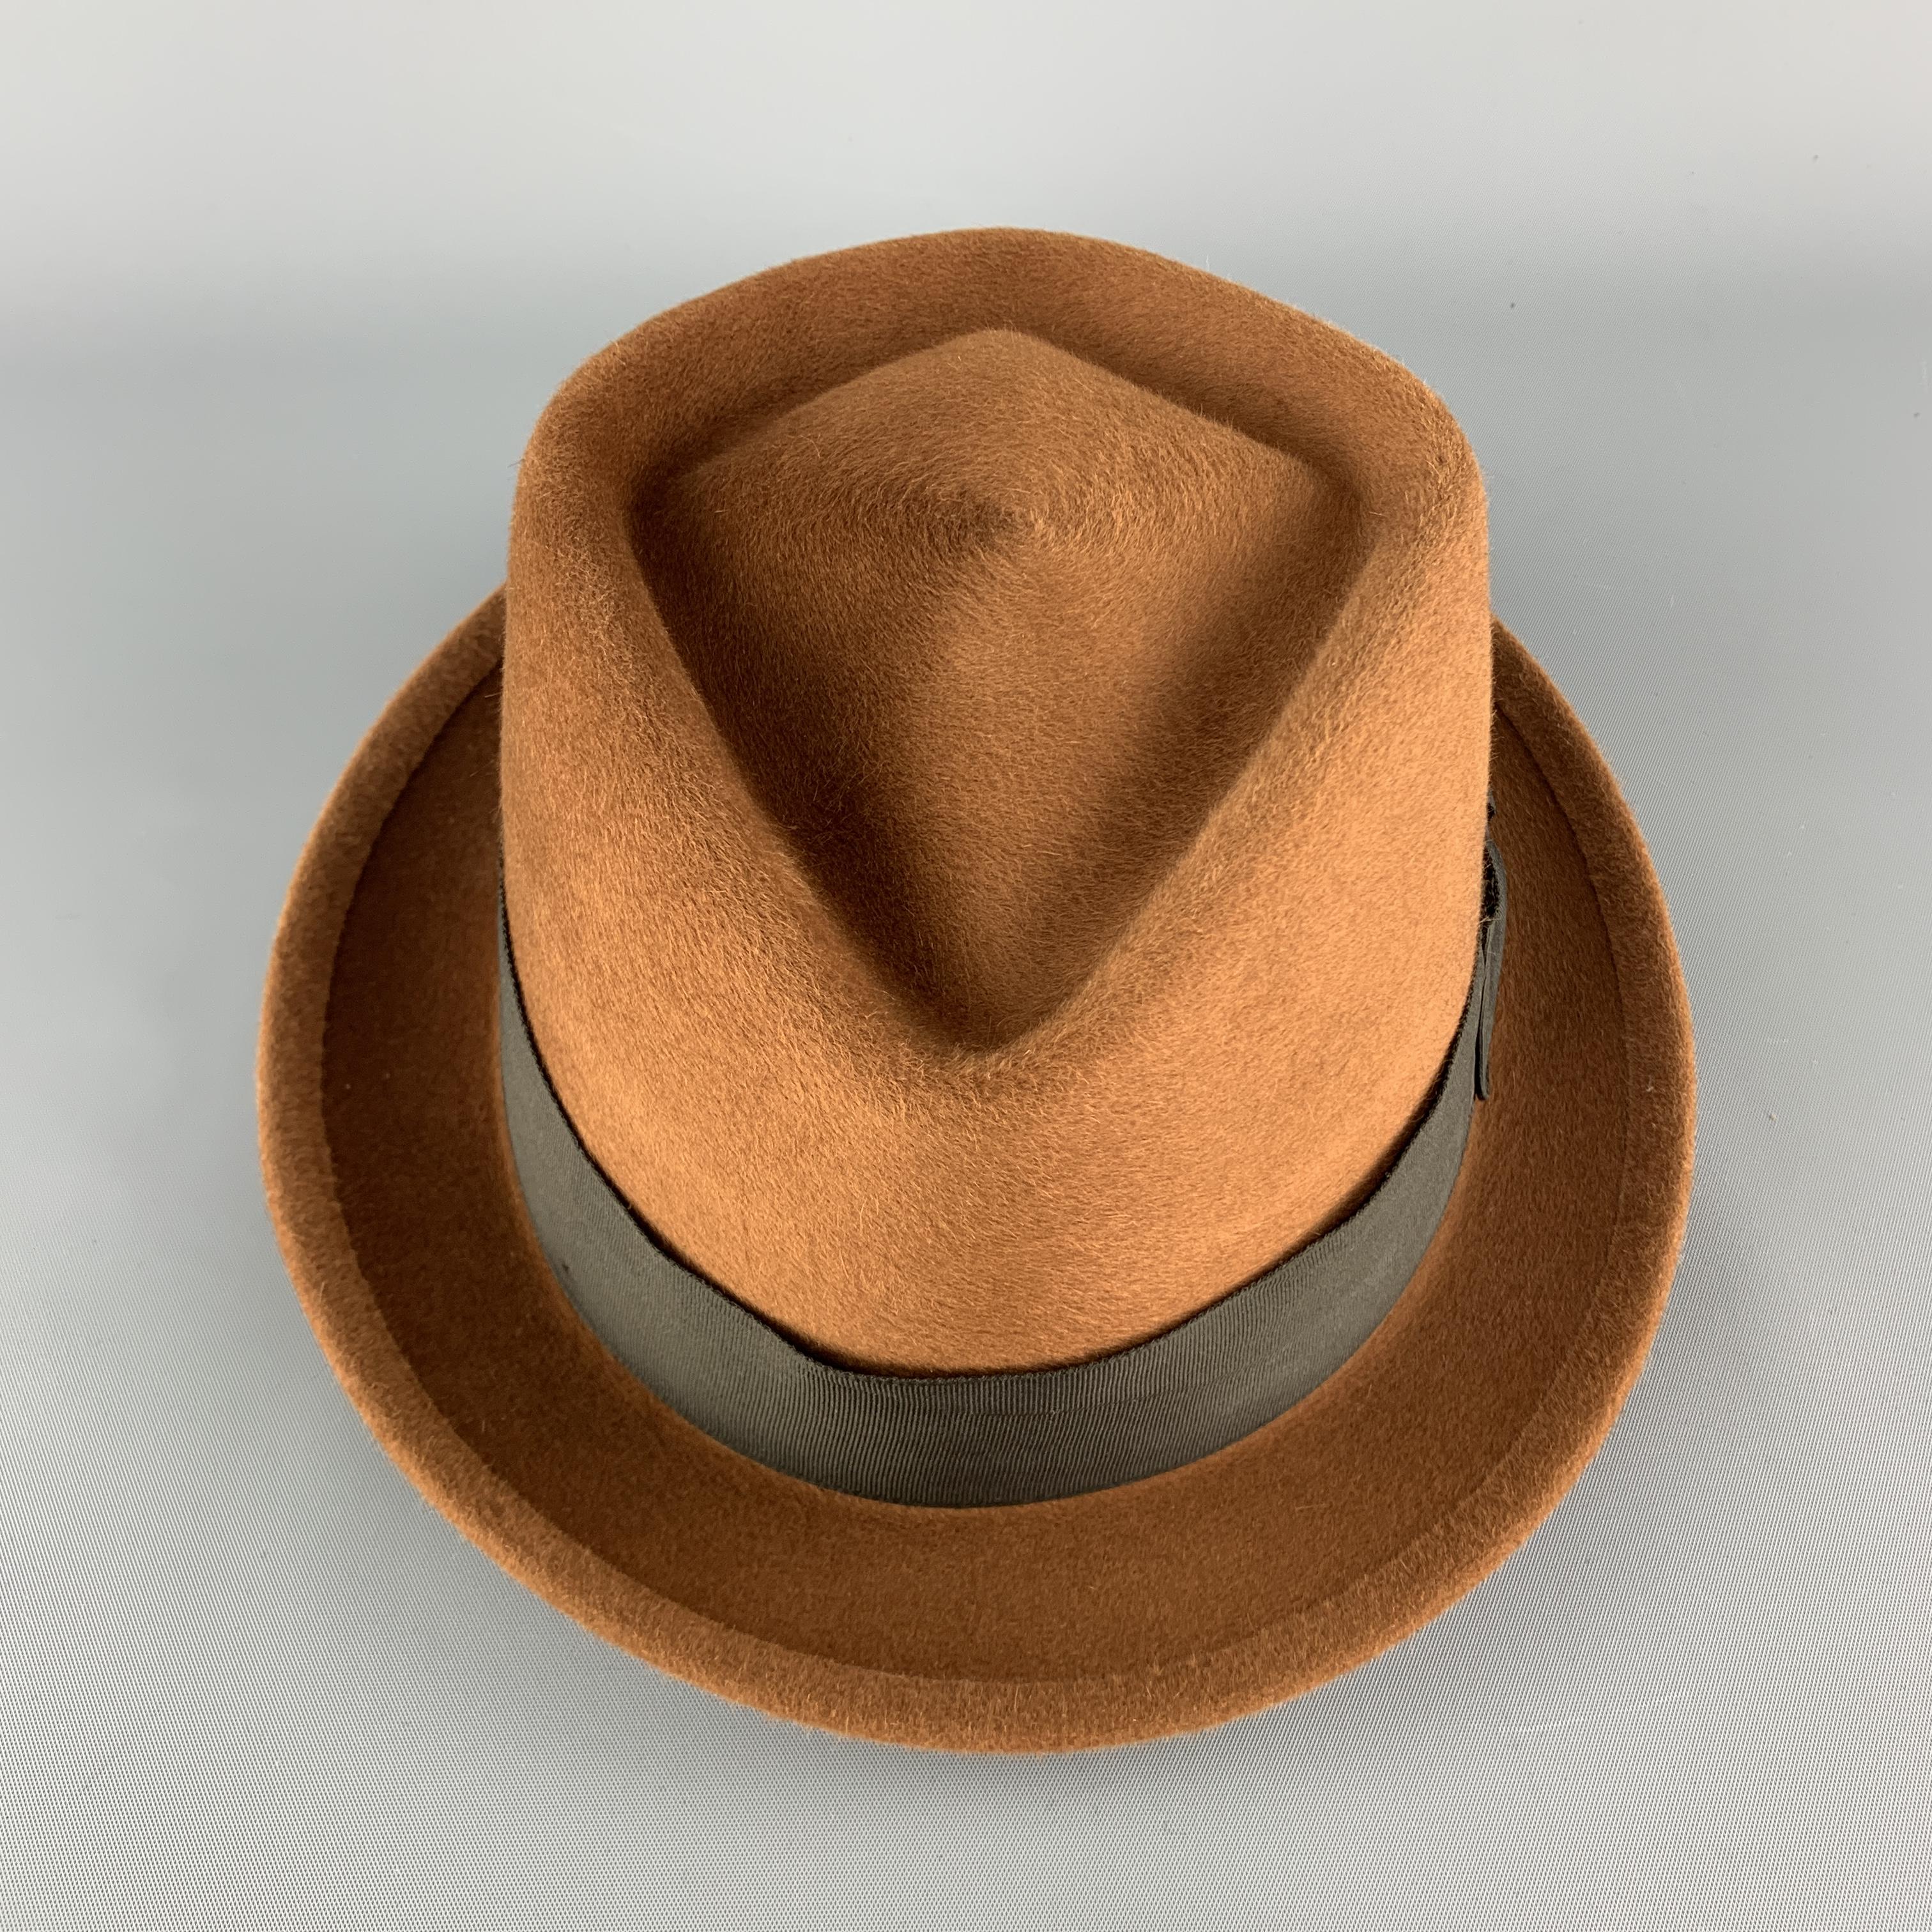 BILTMORE fedora comes in tan brushed felt with a diamond crown and black ribbon trim. Made in Canada.

Excellent Pre-Owned Condition.
Marked: 6 7/8  55

Measurements:

Opening: 22.5 in.
Brim: 1.25 in.
Height: 3.5 in.